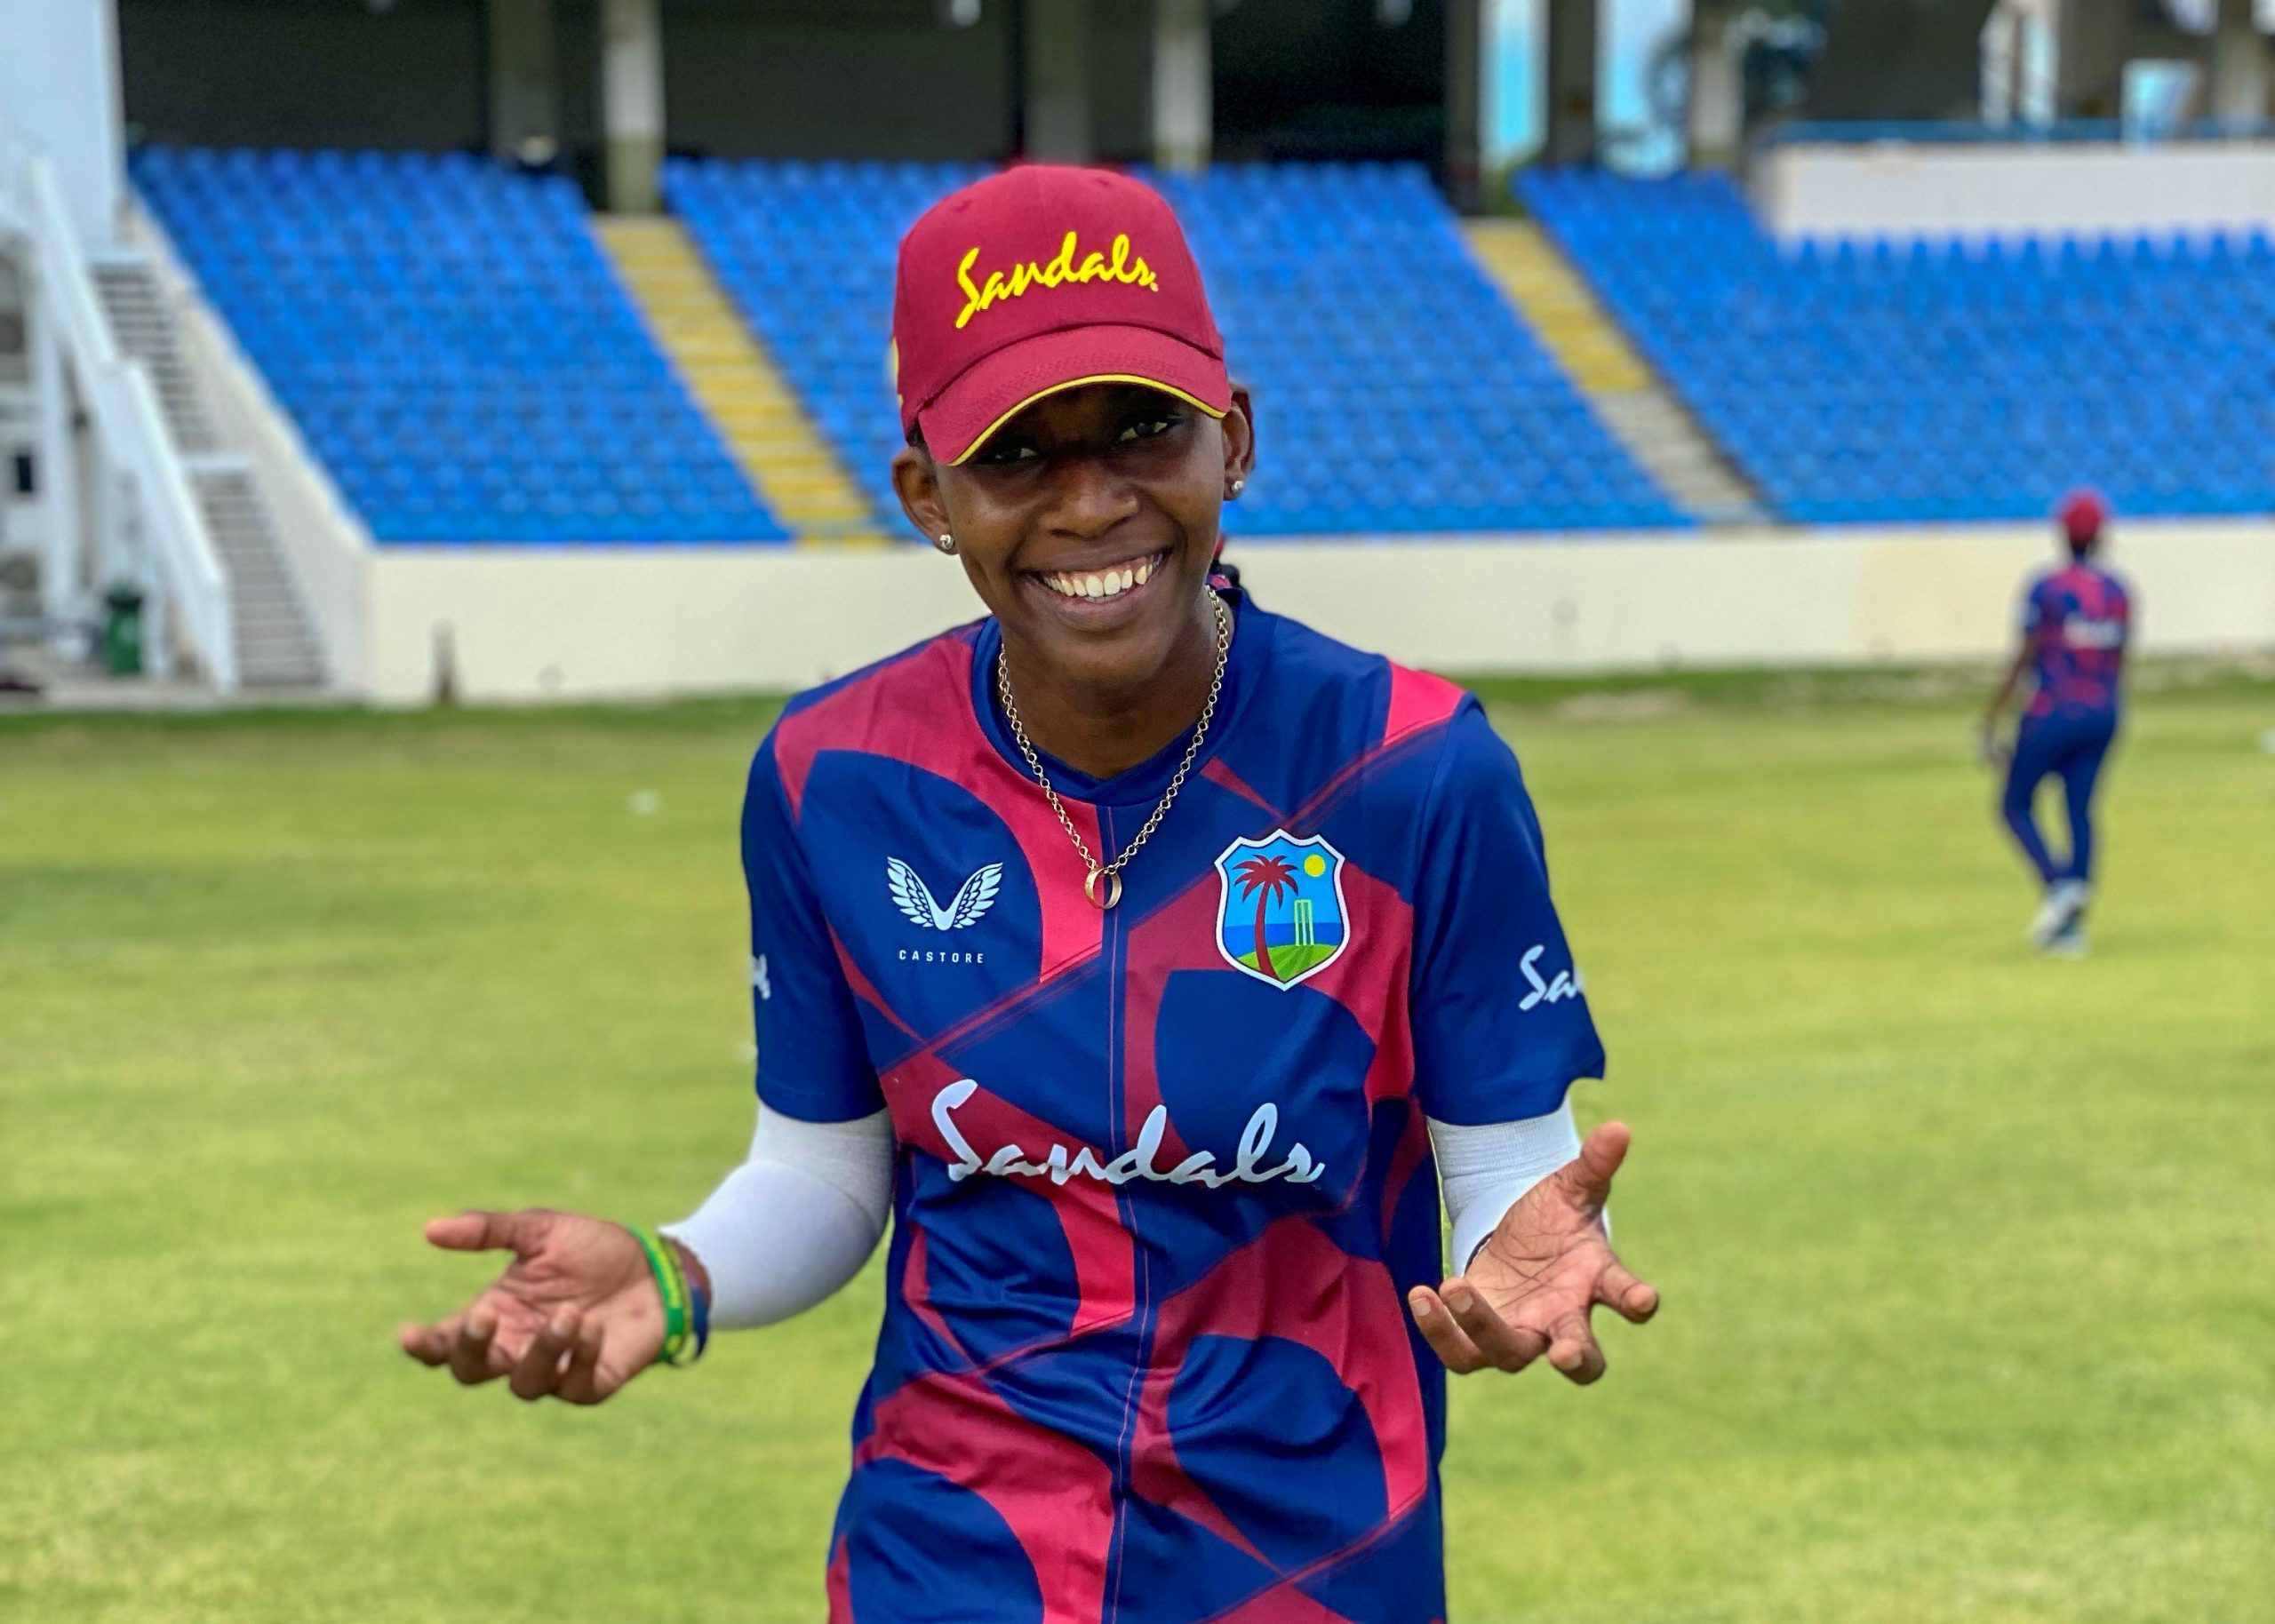 Shanika Bruce replaces Fraser for Women’s T20I tri-series in South Africa